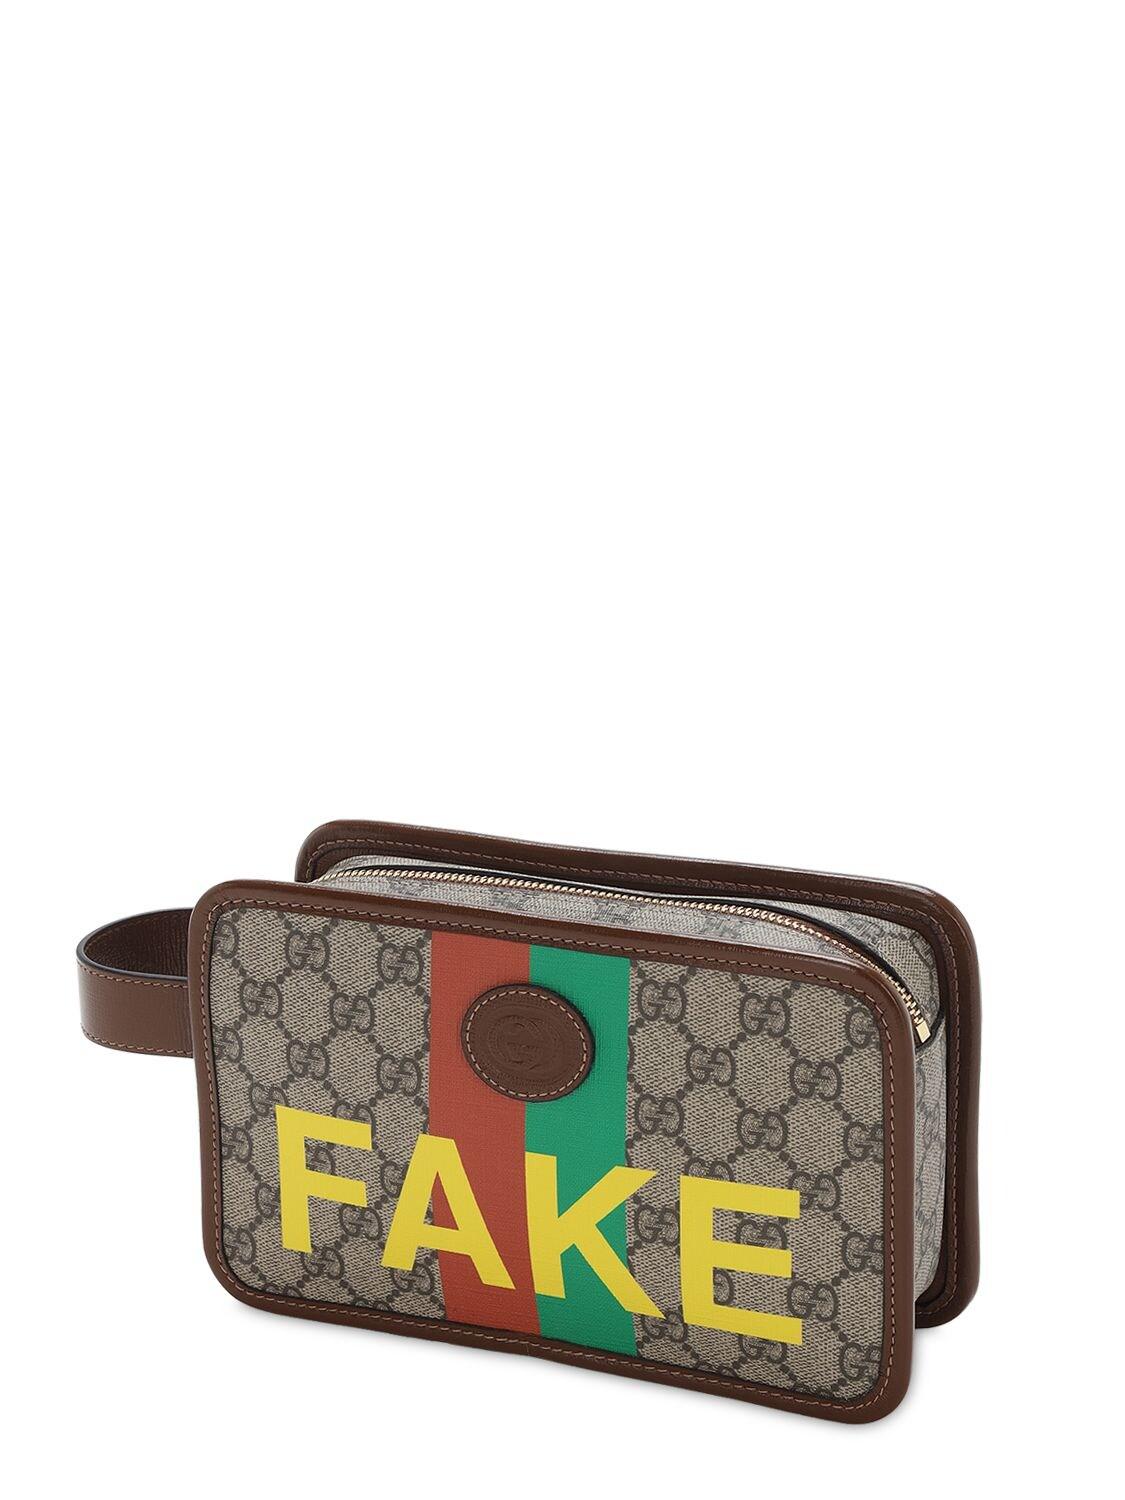 Gucci 'fake/not' Print Cosmetic Case in Natural for Men | Lyst